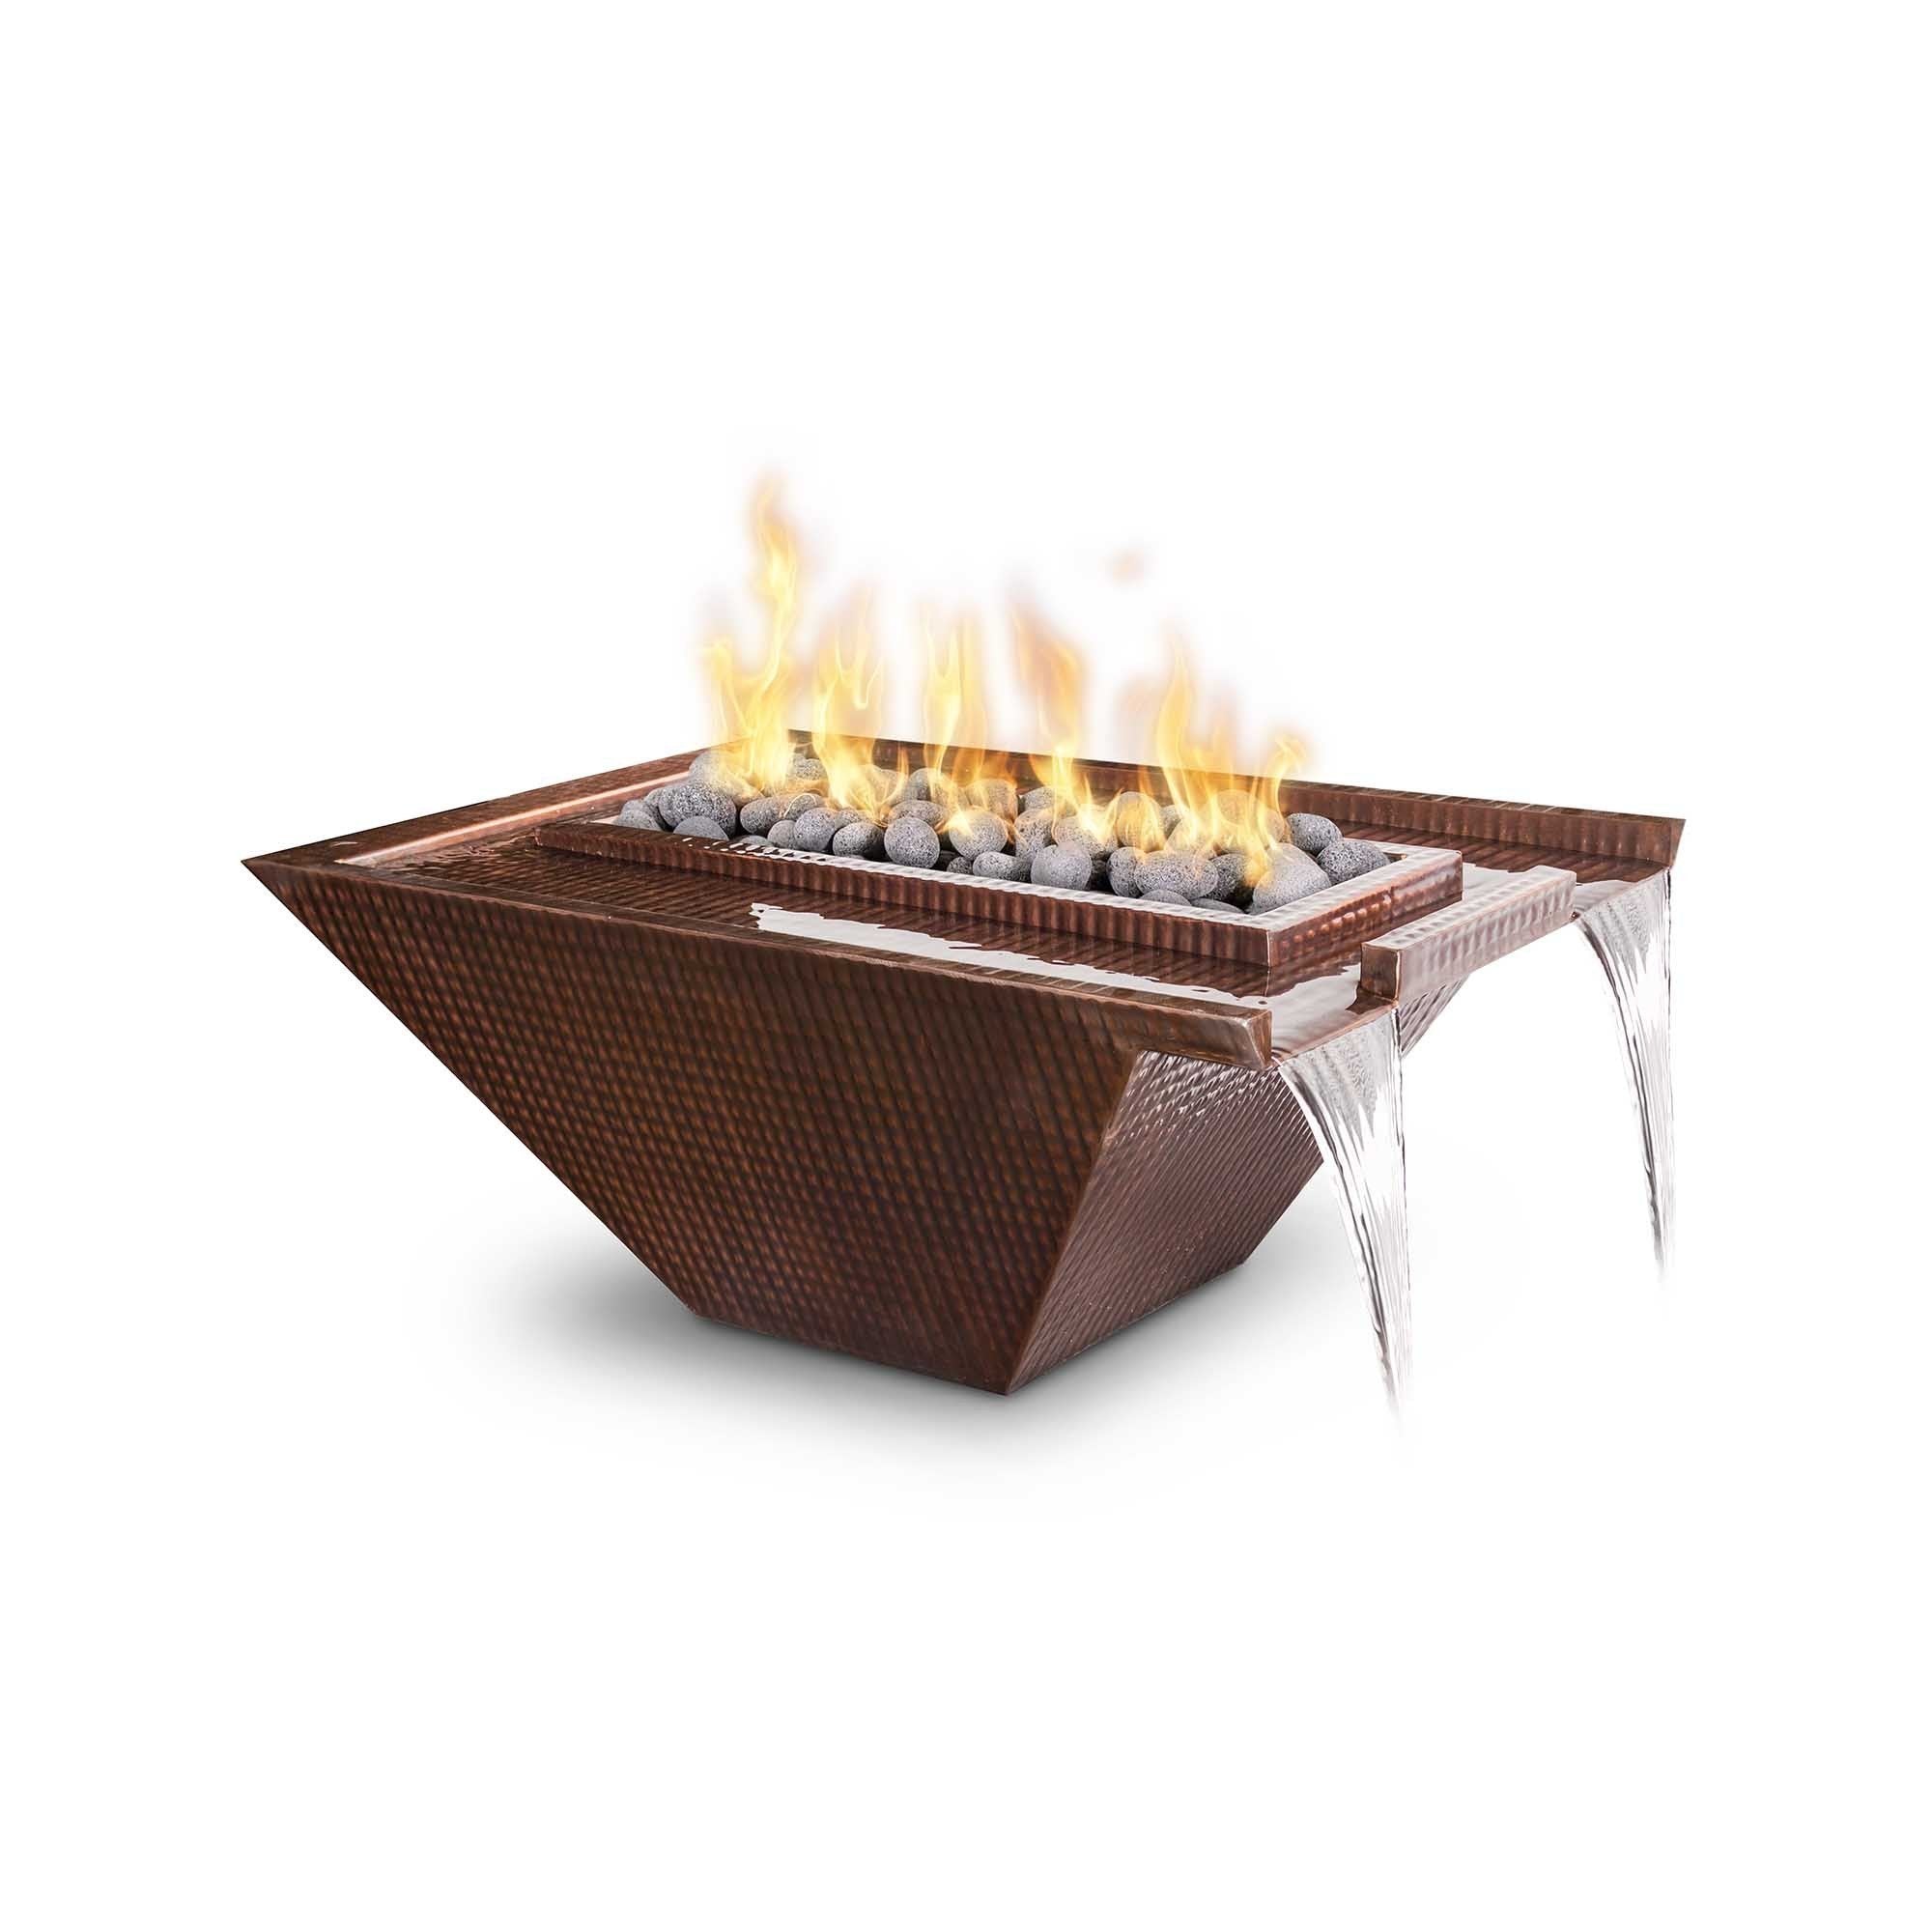 The Outdoor Plus Nile Fire & Water Bowl in Copper